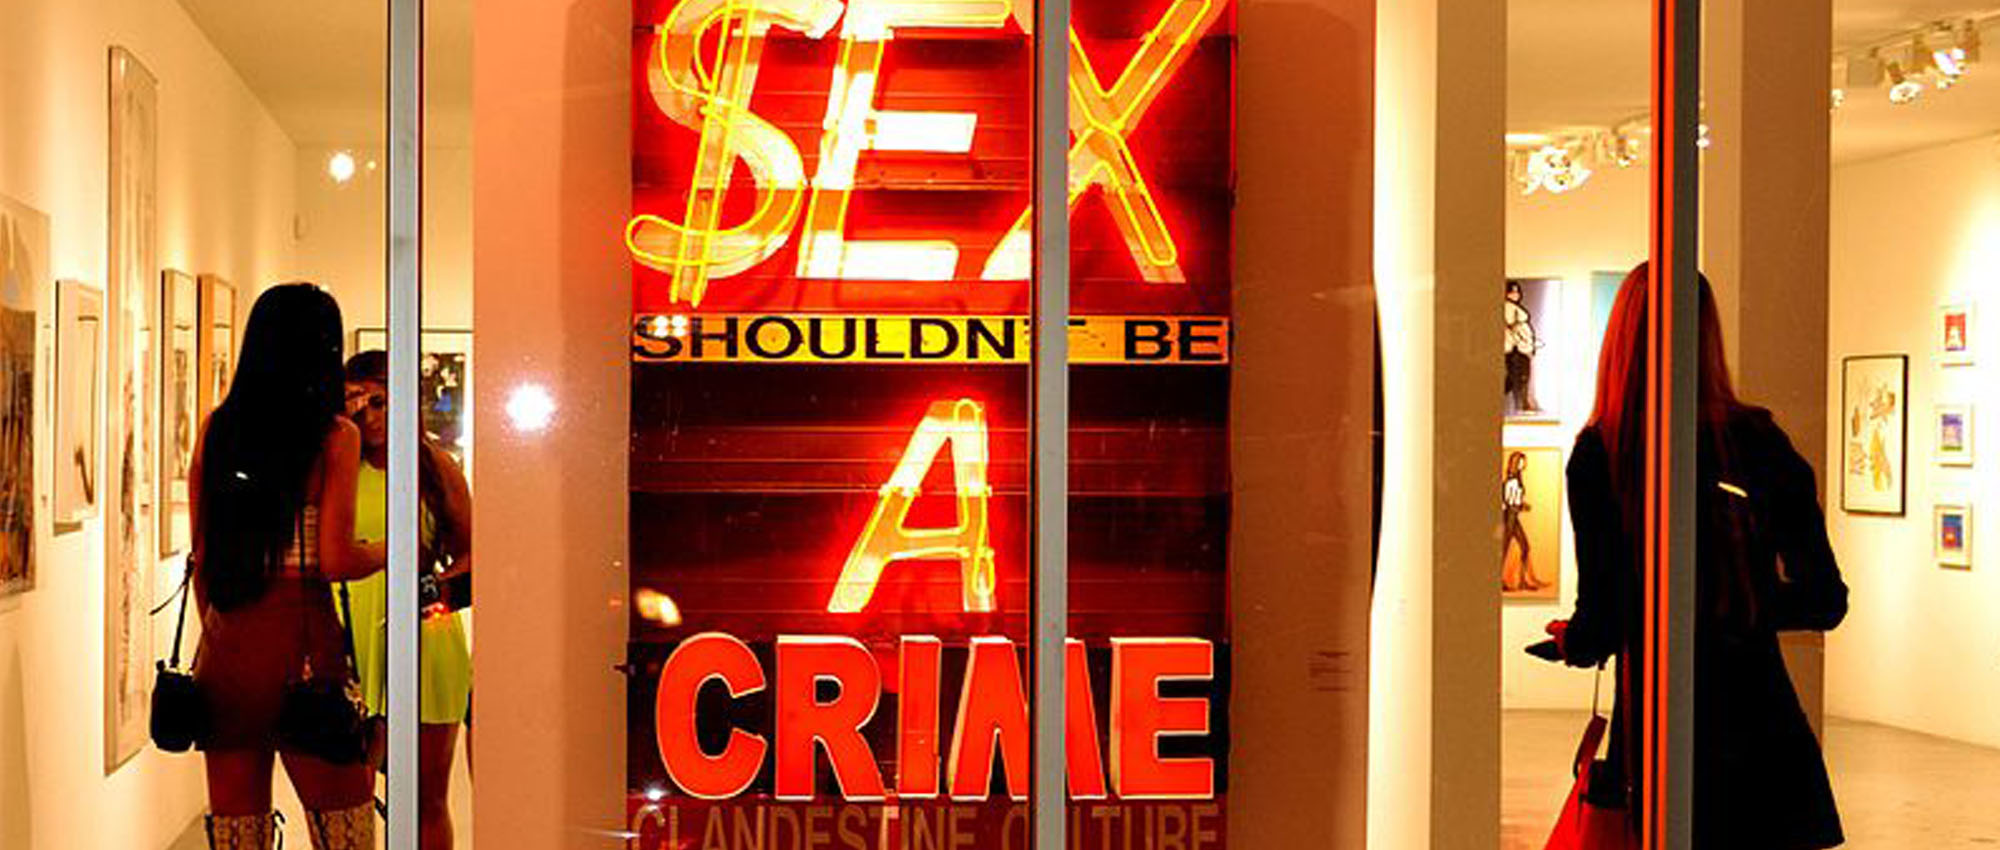 CLANDESTINE-CULTURE-Sex-shouldnt-be-a-crime-the-artwork-in-gallery-2015